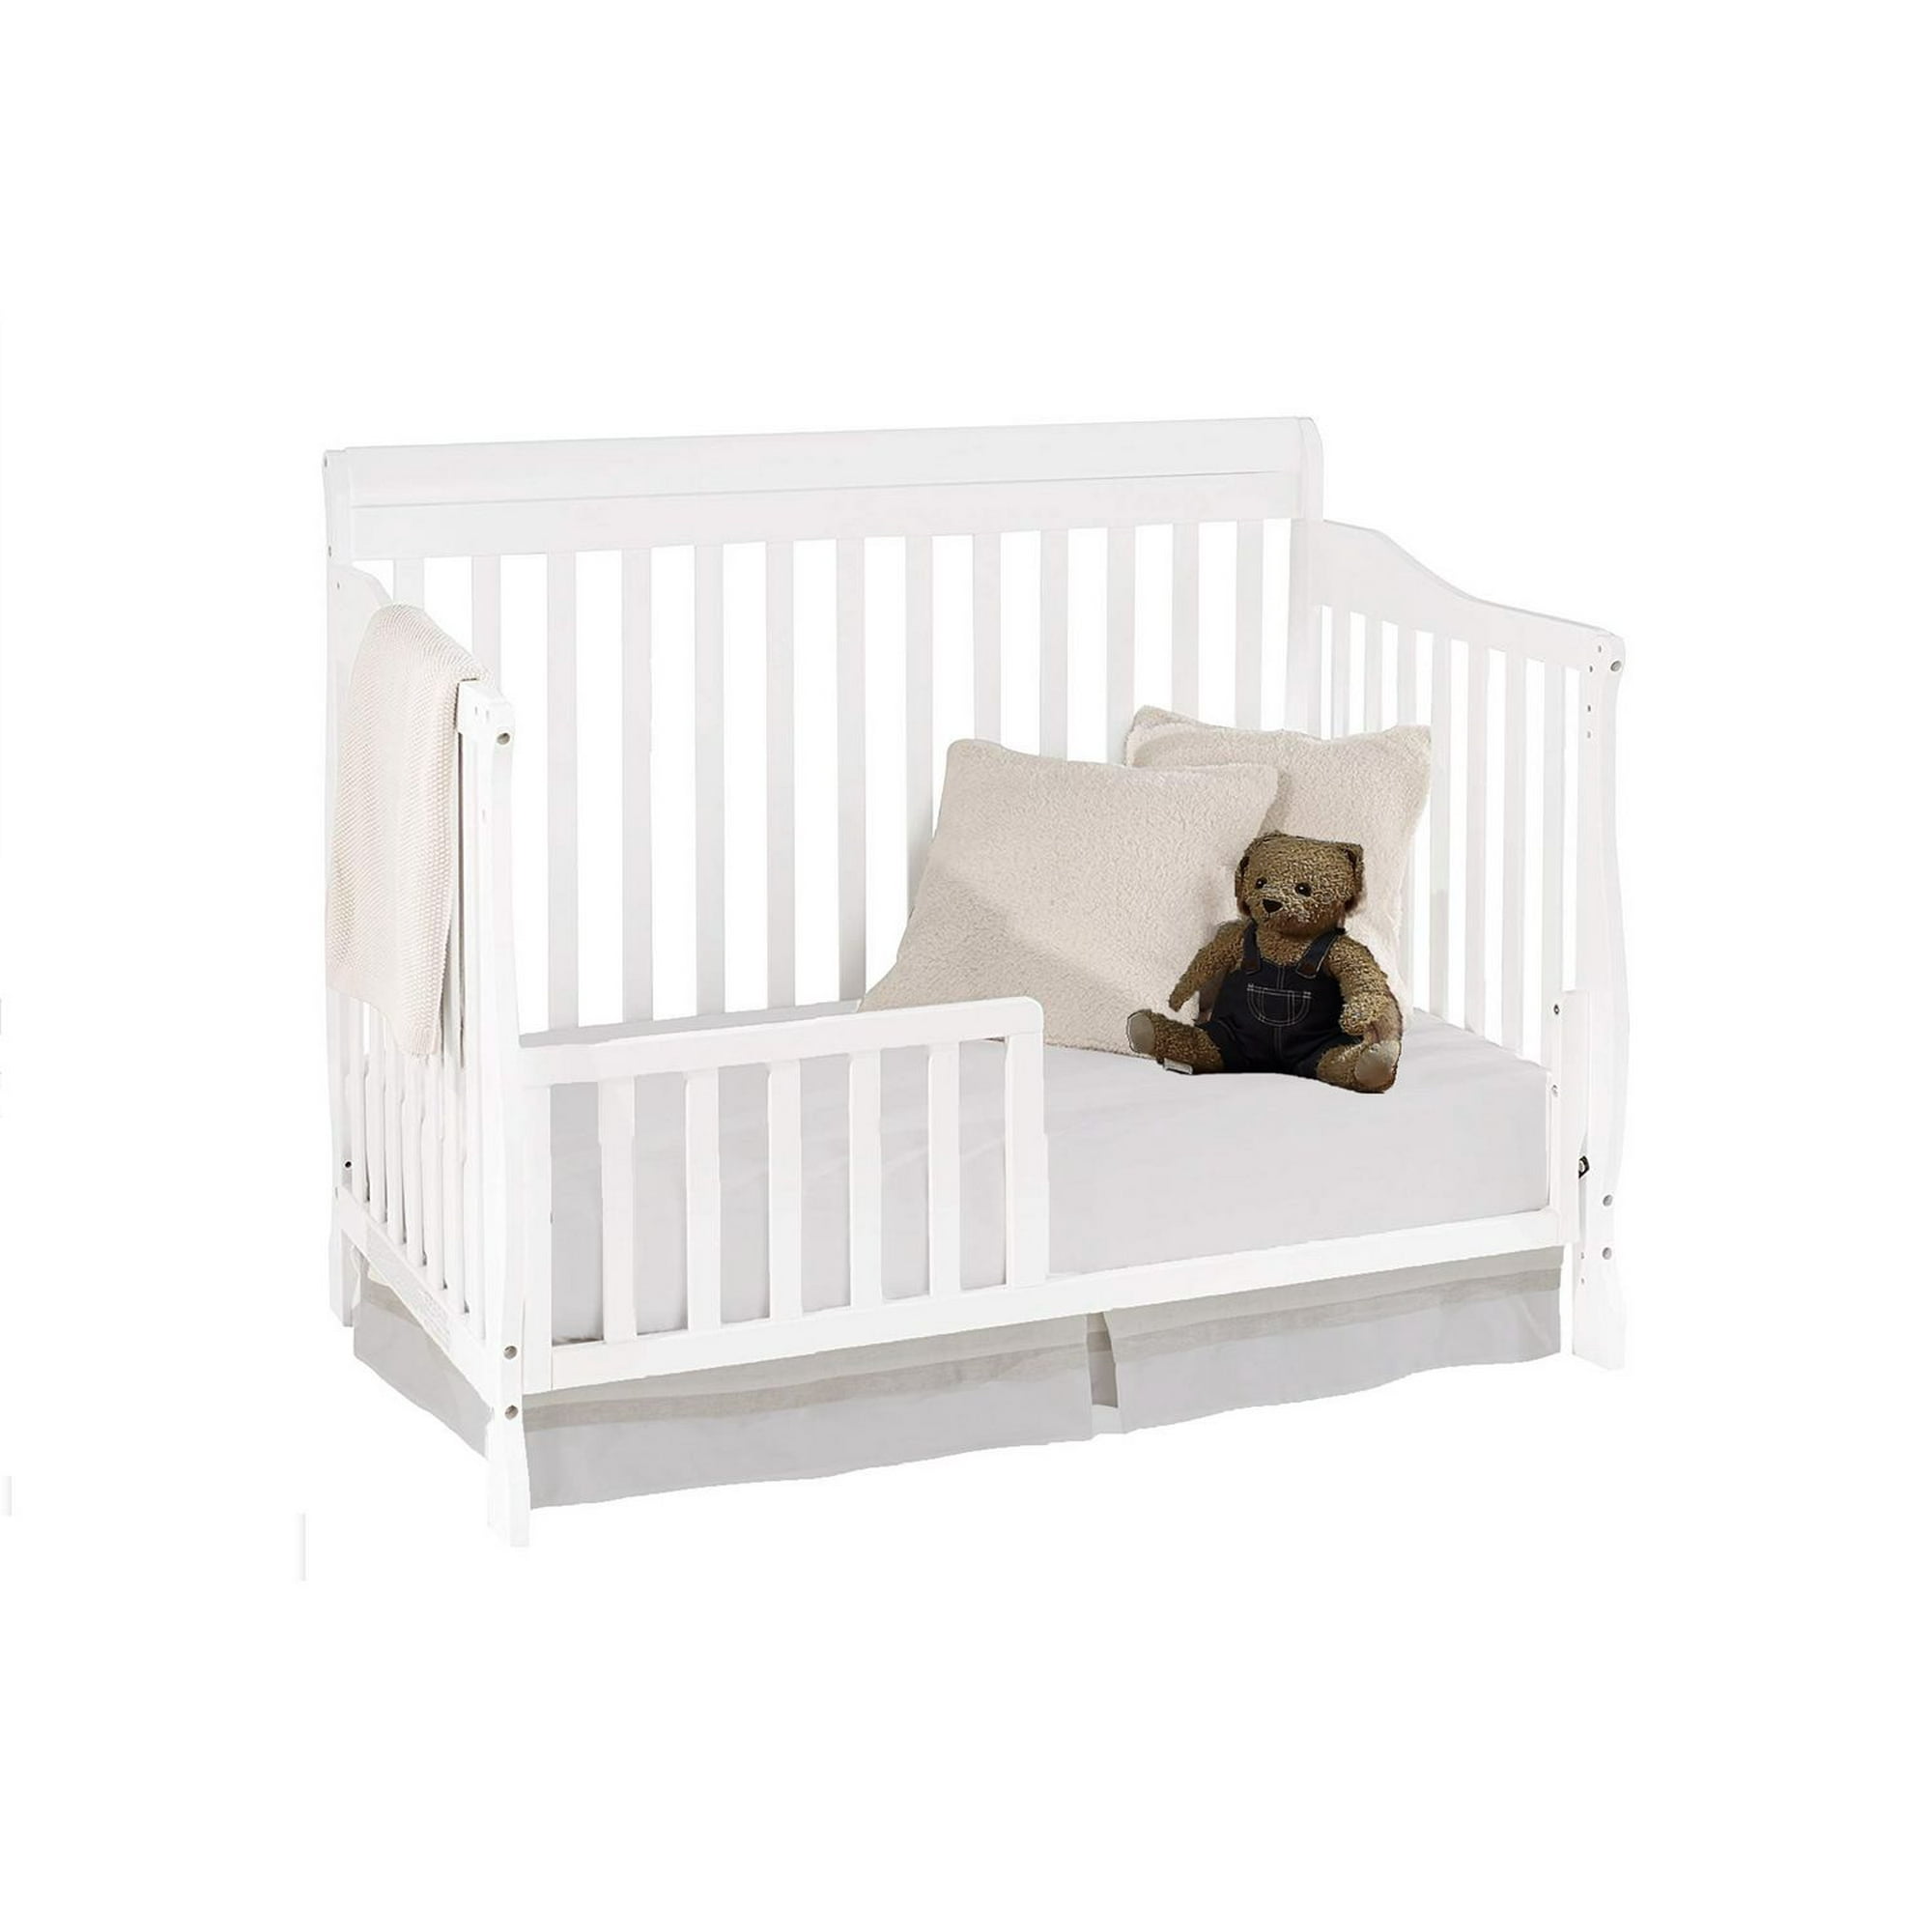 Concord Baby Toddler Guard Rail 